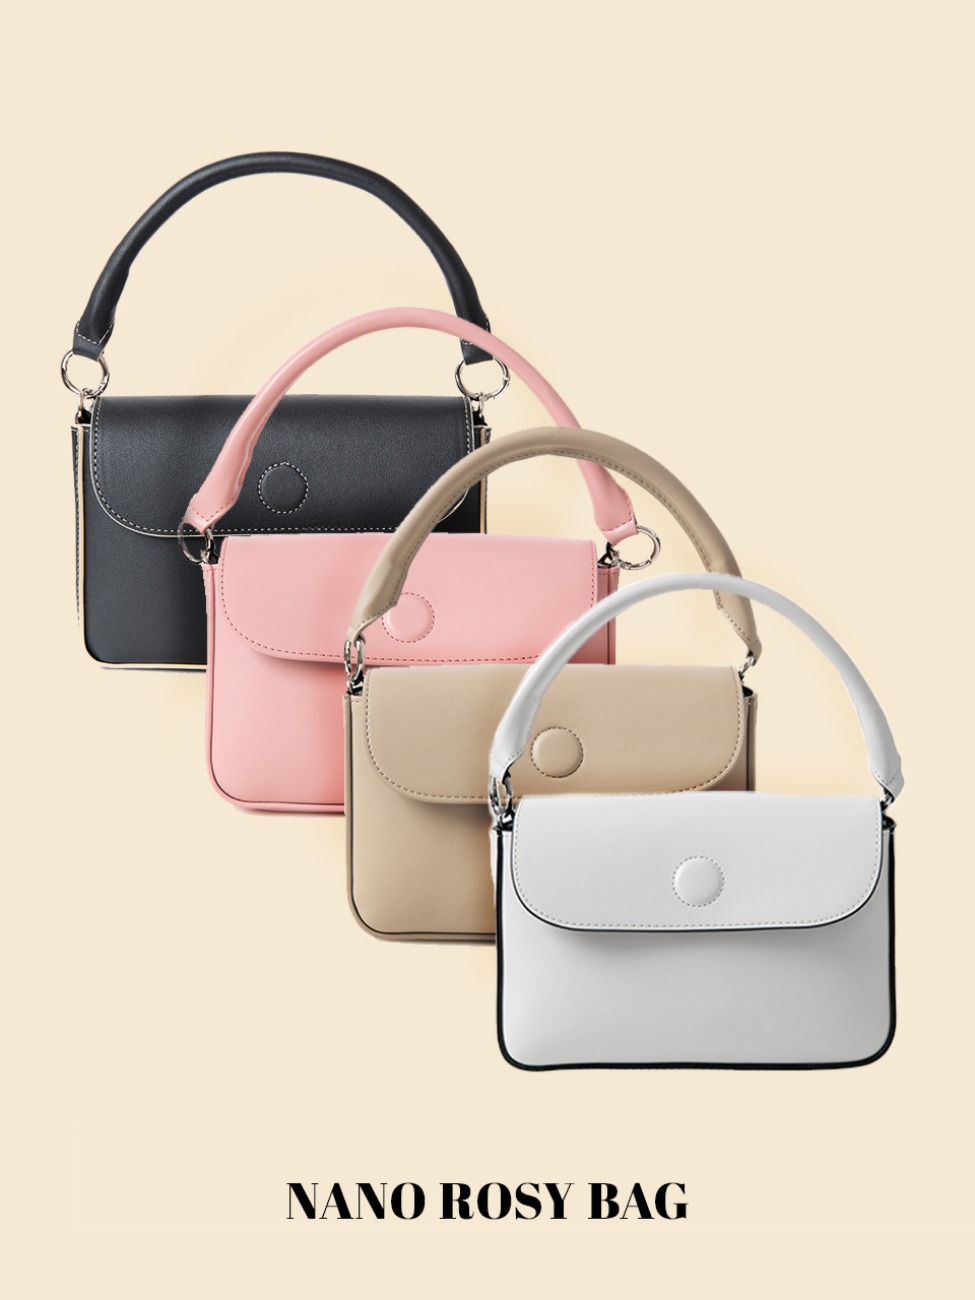 [by Atelier] NANO ROSY BAG _ 5 Colors